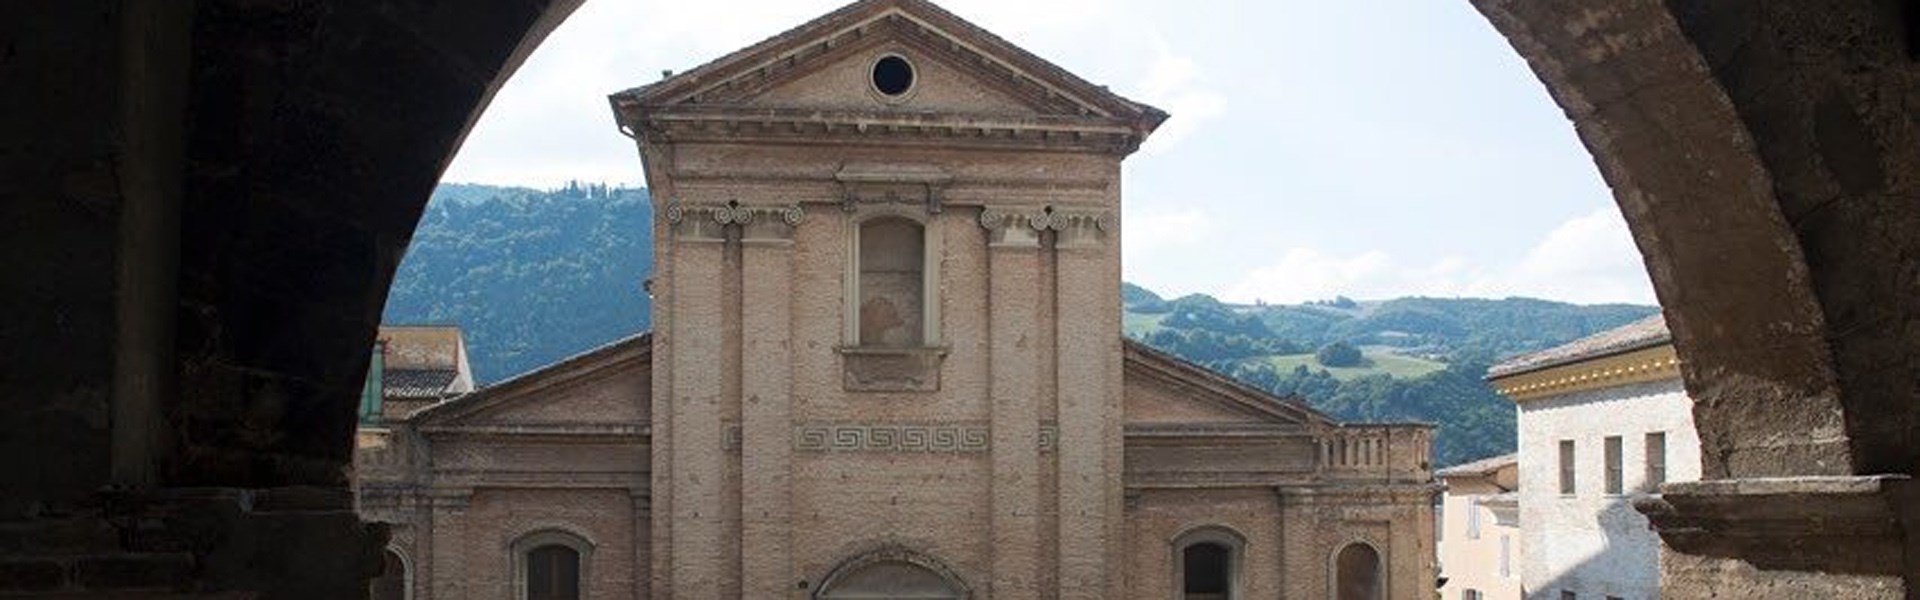 Fossombrone - Cattedrale